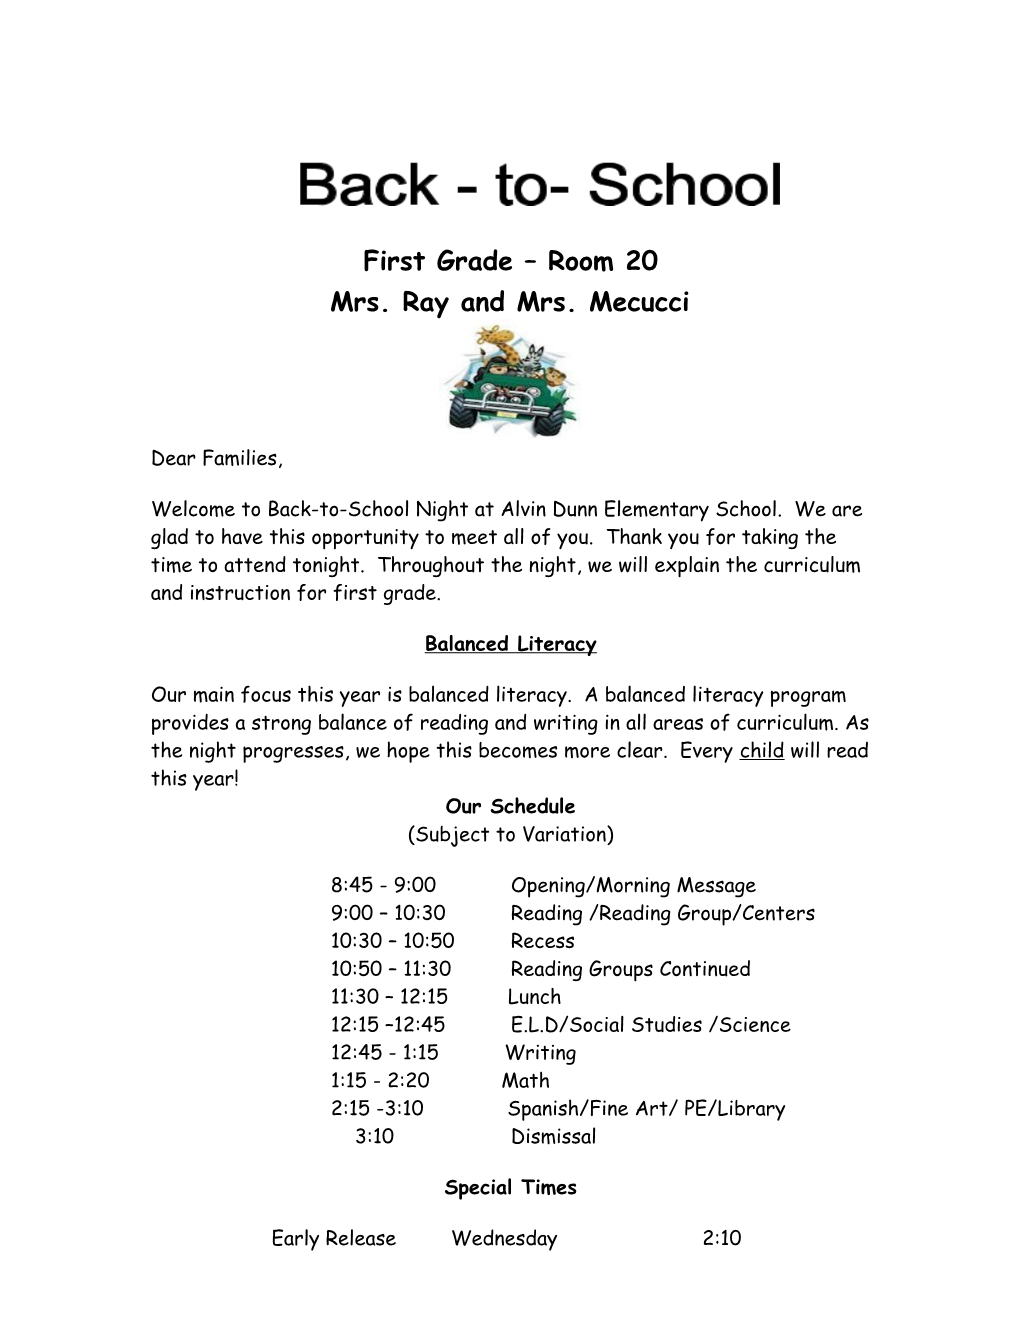 Back to School Night Packet 2014-2015 AD